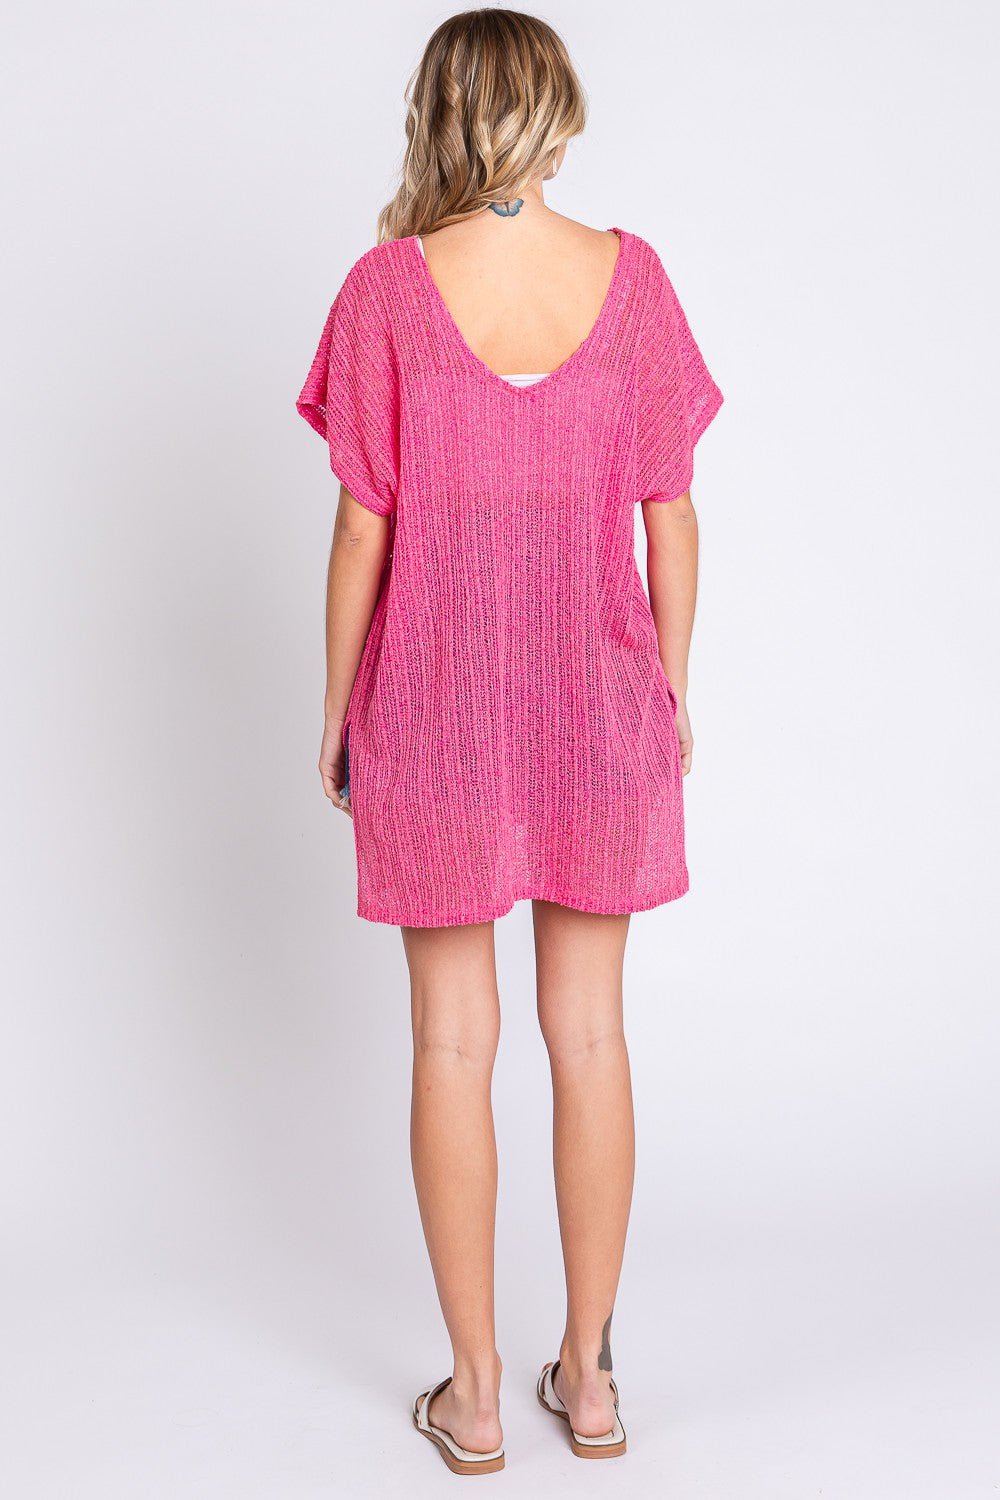 Short Sleeve Knit Cover Up in Hot PinkCover-UpGeeGee